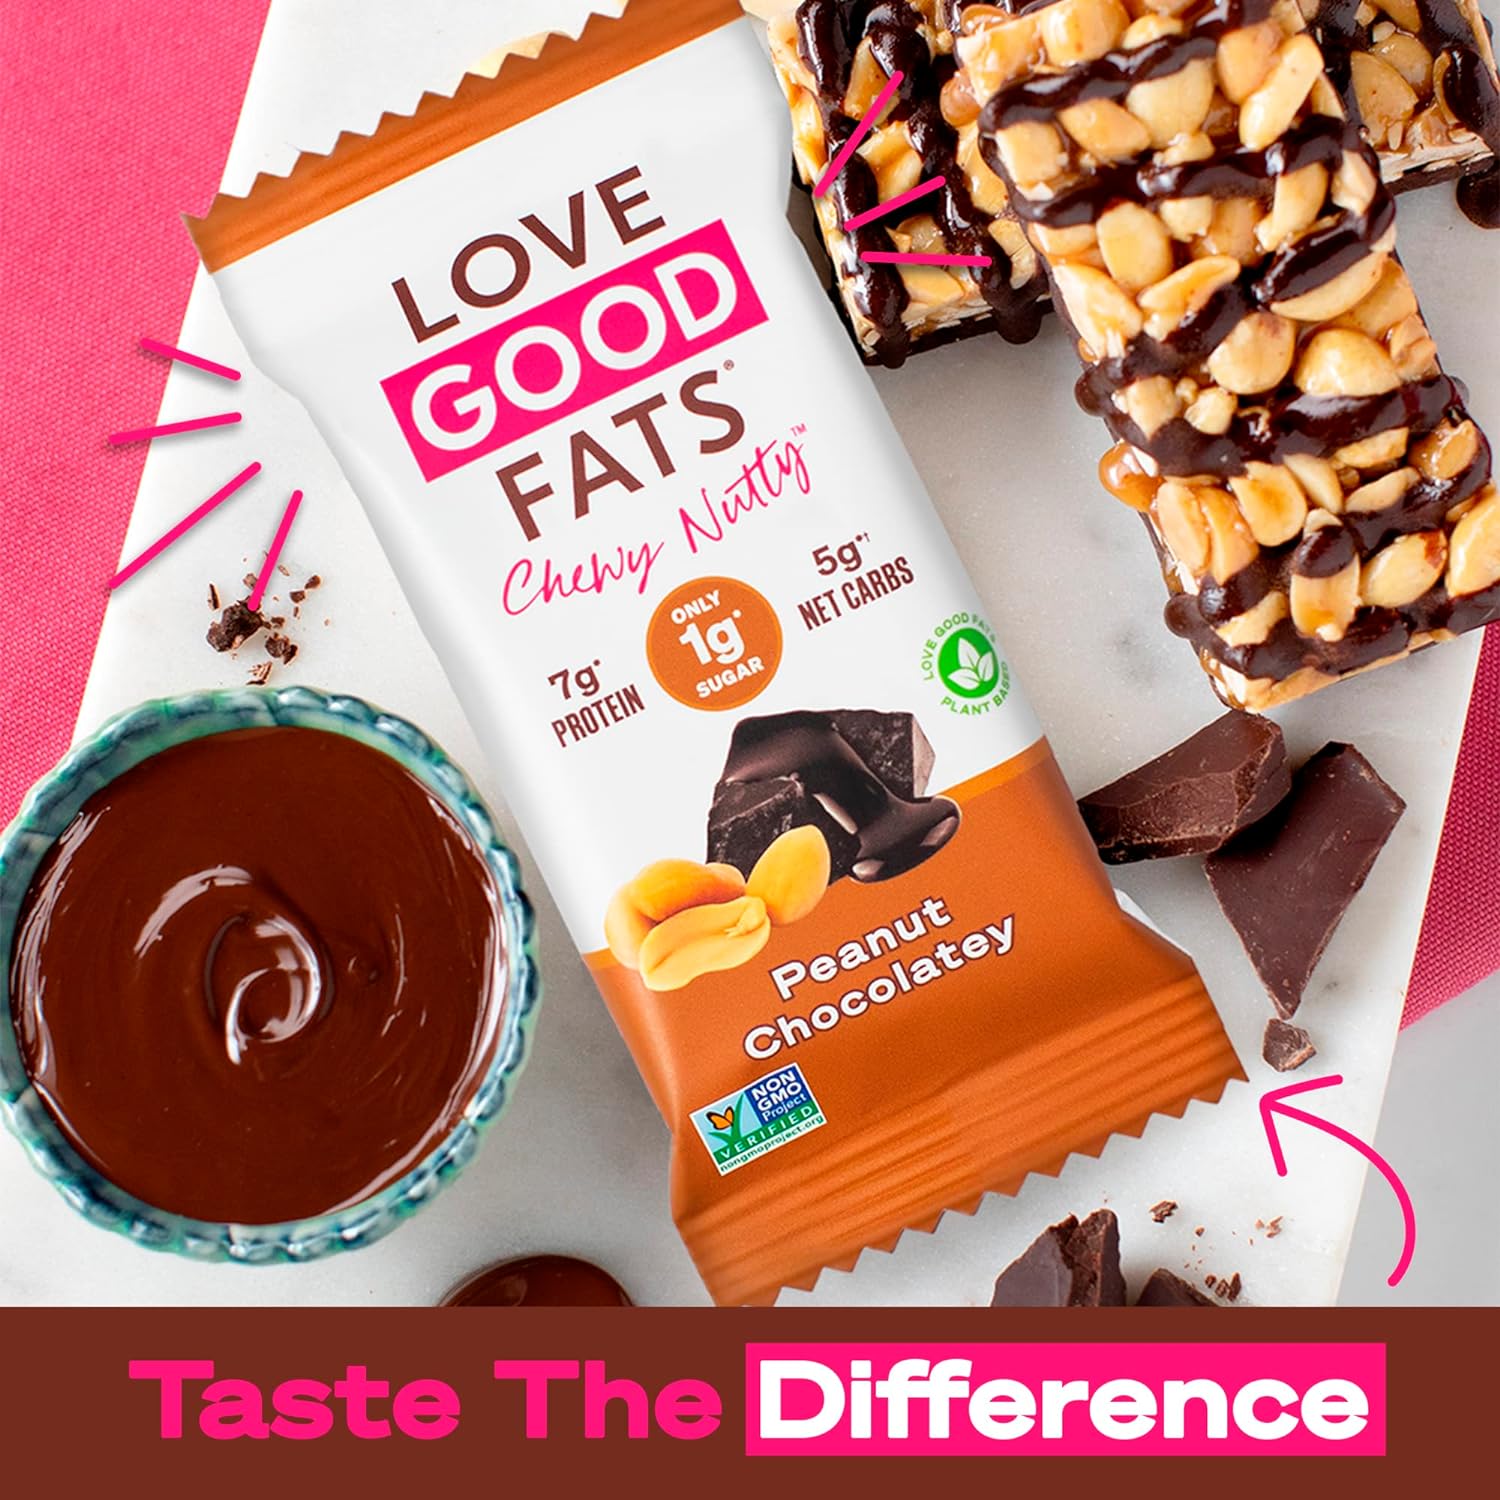 Love Good Fats Plant-Based Keto Protein Snack Bars - Chewy Nutty Peanuts and Dark Chocolate - 13g Good Fats, 7g Protein, 5g Net Carbs, 1g Sugar, Gluten-Free, Non GMO - Peanut Butter Chocolatey, 12 Pack : Health & Household